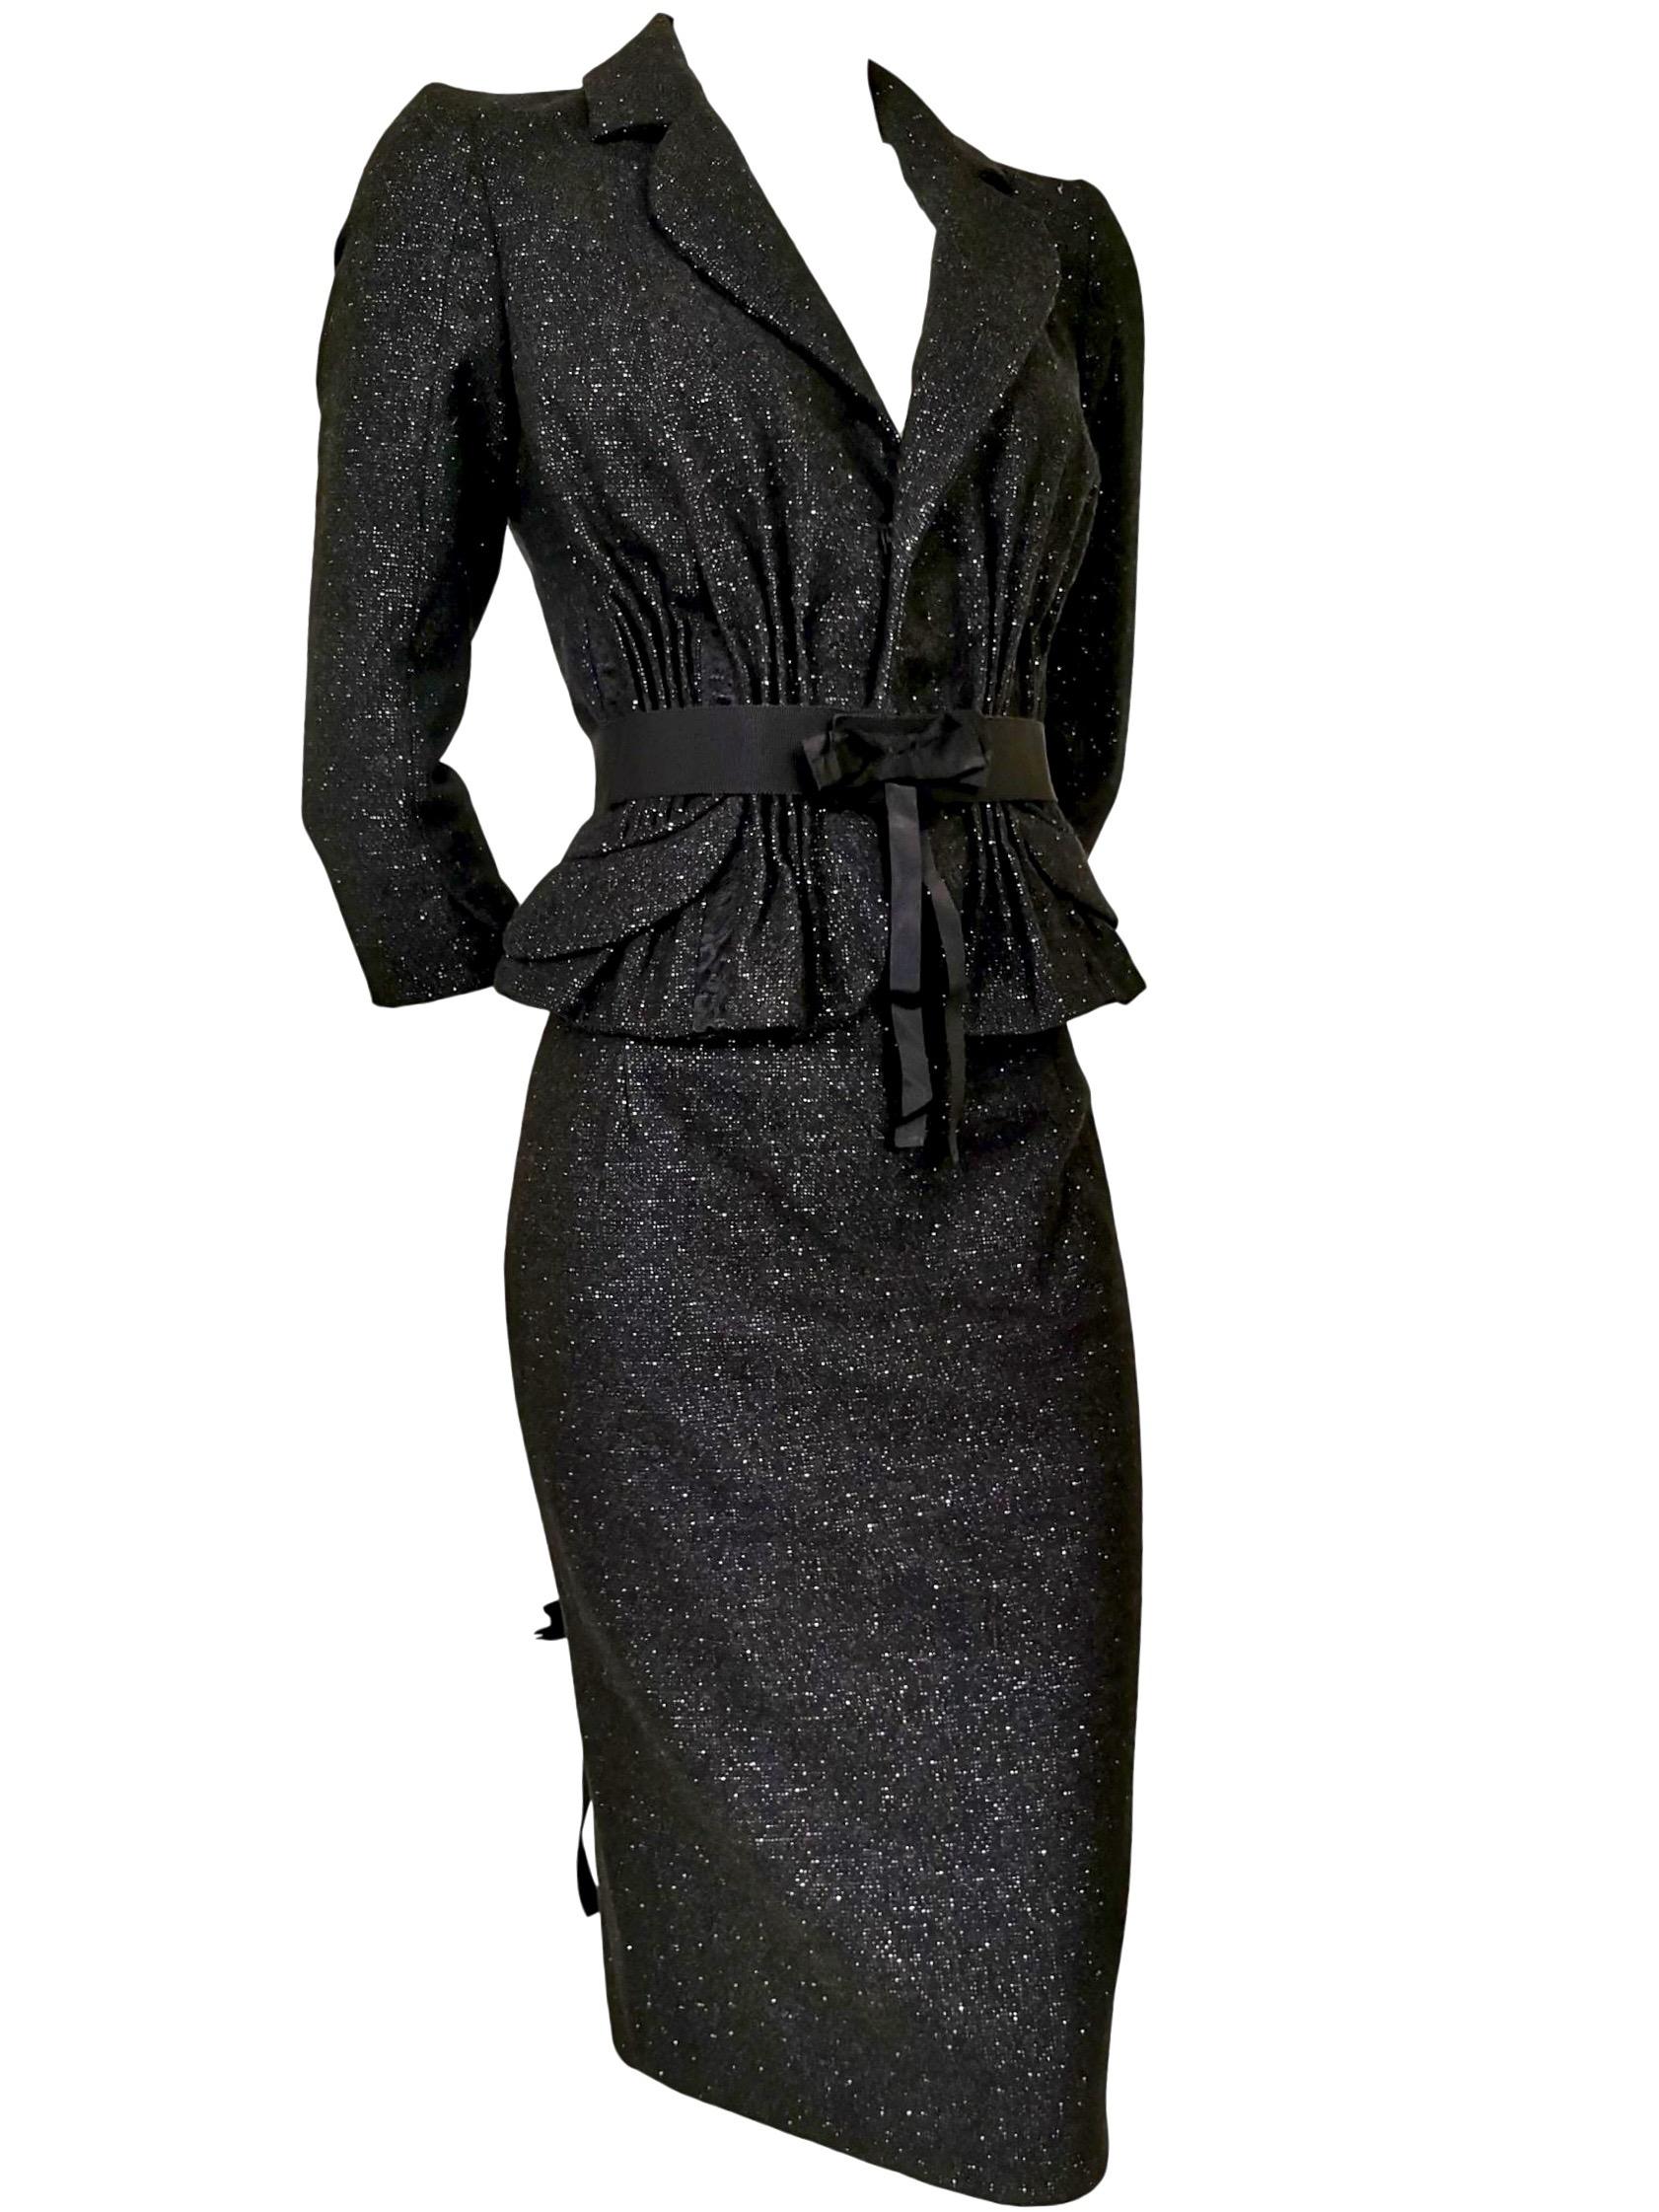 John Galliano Wool/Cashmere, Lace and Ribbon Skirt Suit A/W 2011 For Sale 8